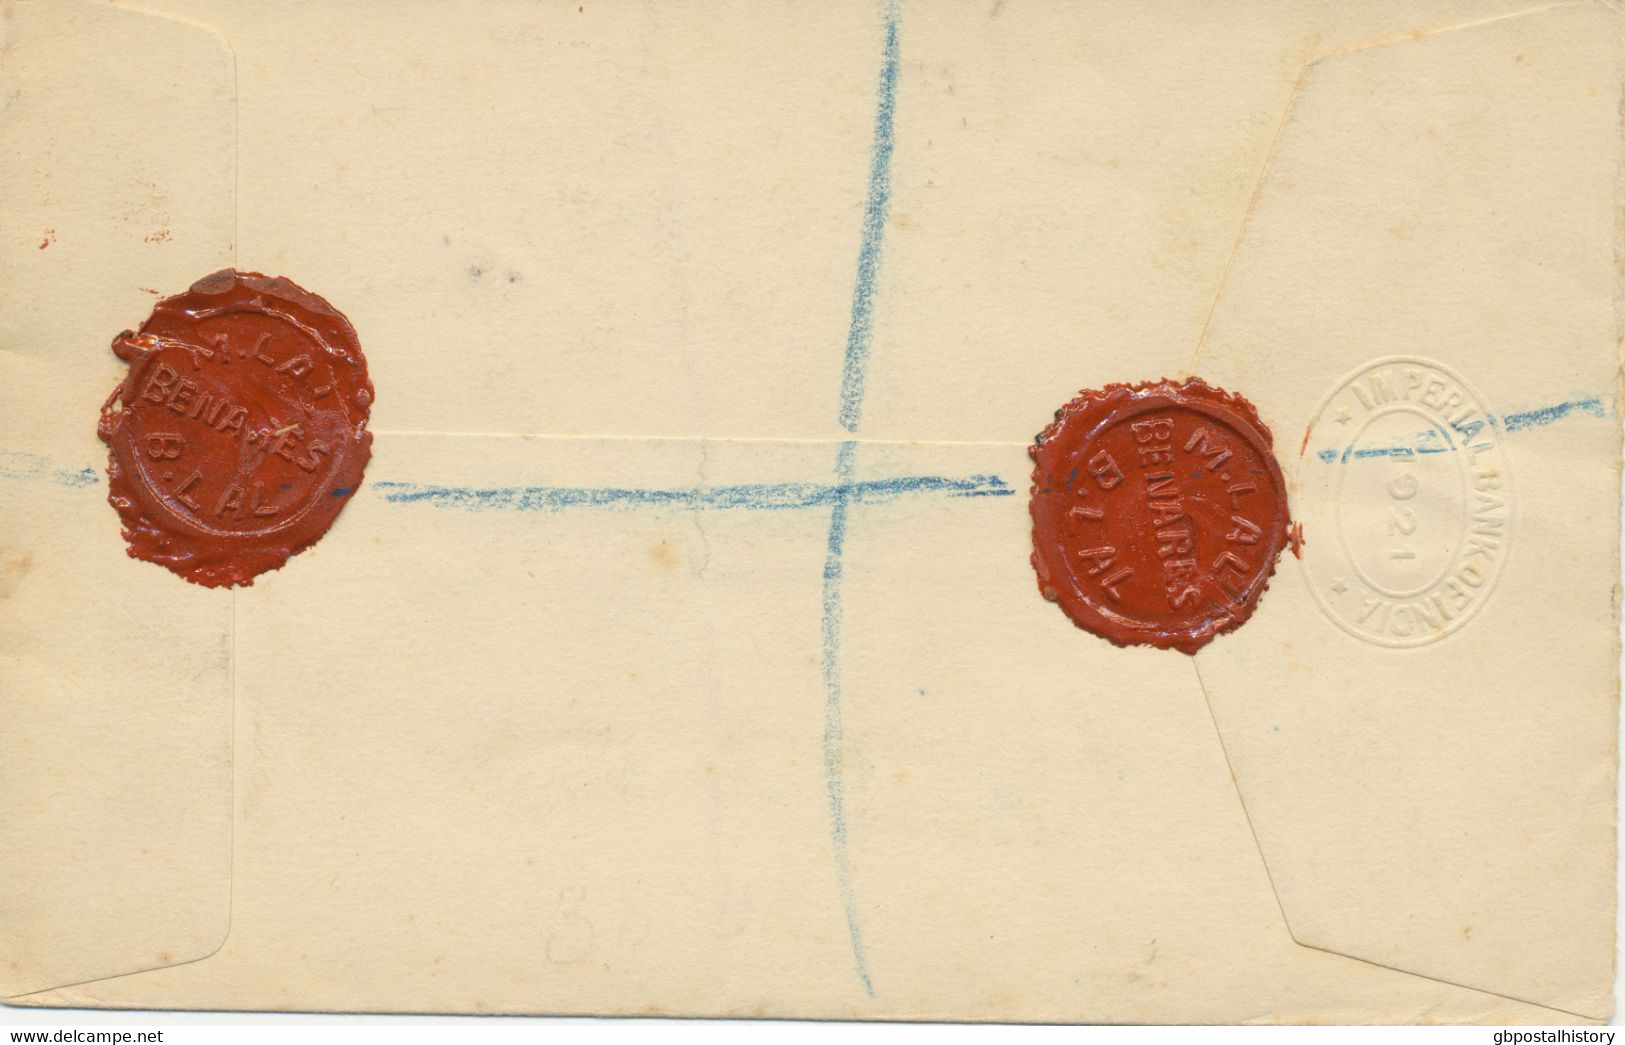 INDIA 1931, GV 4 Annas And 1 Anna (coil- Or Bookletstamp) On Fine Registered Cover From „MENARES CANT“ To BOURNEMOUTH - 1911-35  George V